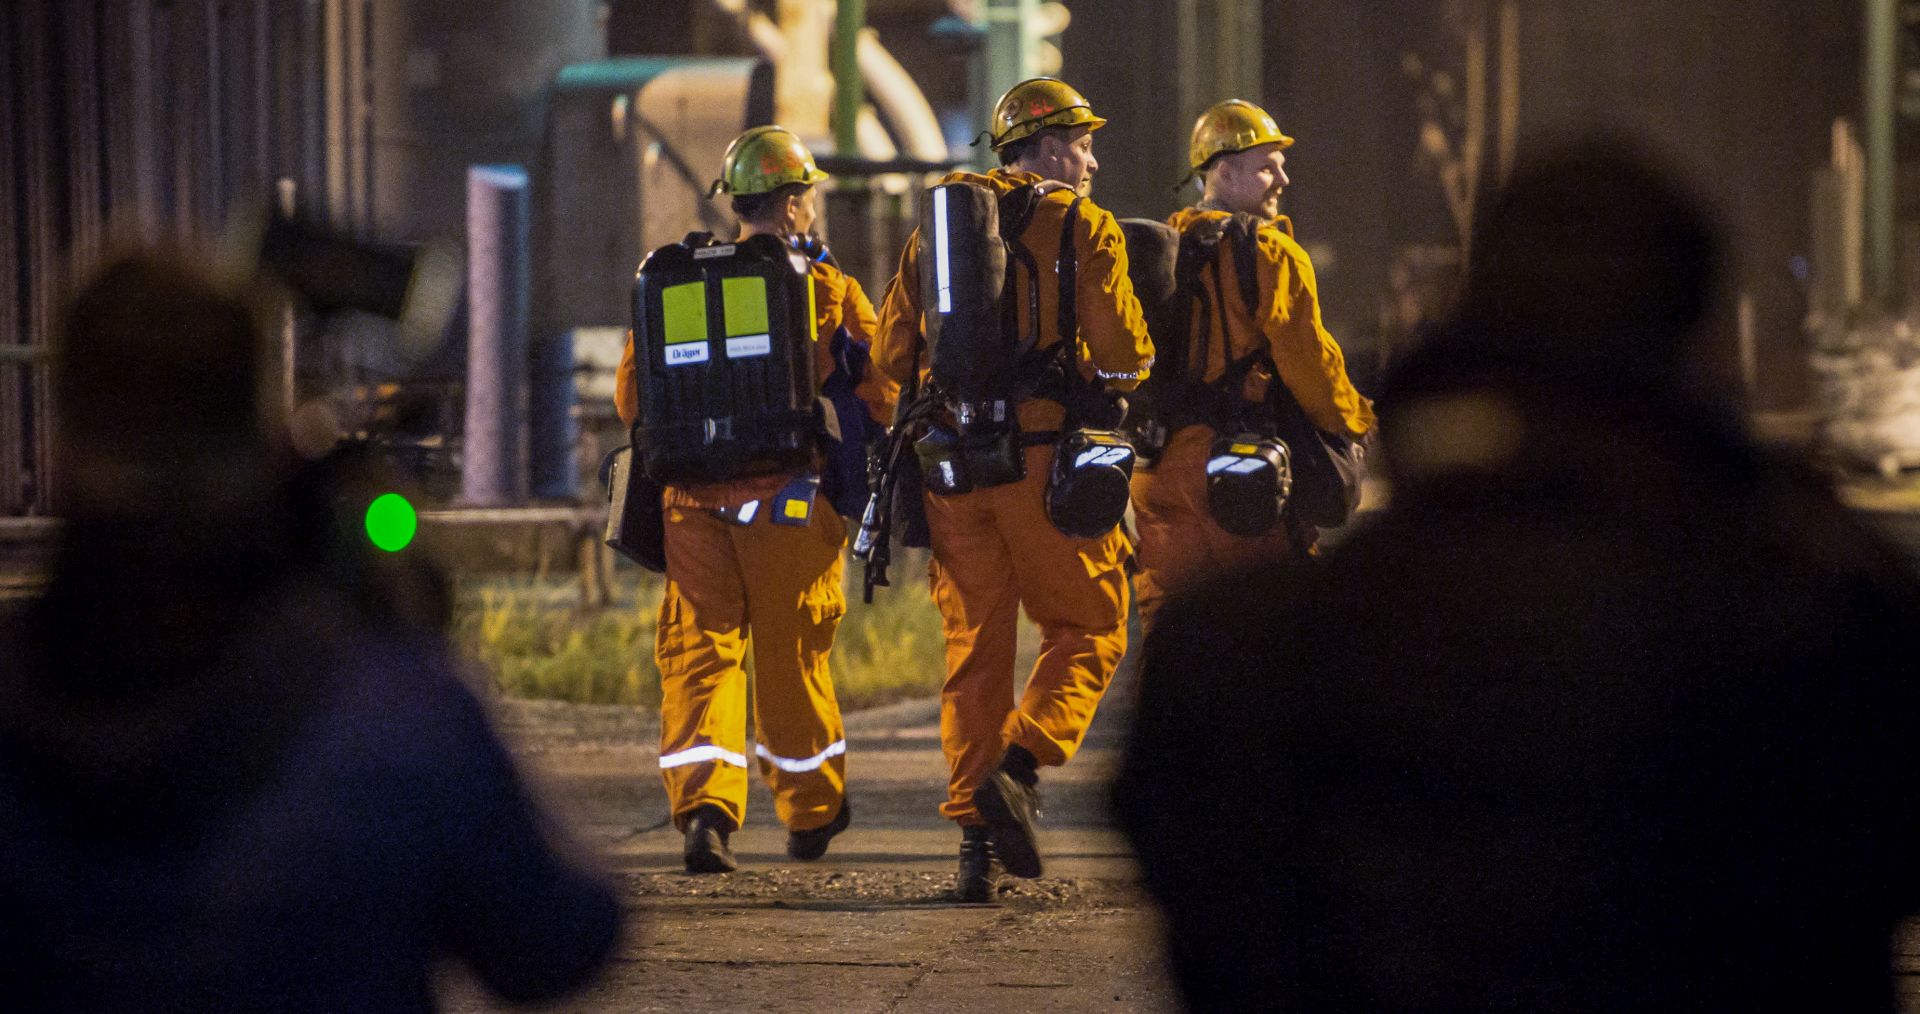 epa07242820 Mining rescue workers walk at the CSM coal mine near Czech-Polish border in Karvina, Czech Republic, 20 December 2018. At least one miner was killed in the blast and another ten were seriously injured, according to local media reports.  EPA/LUKAS KABON